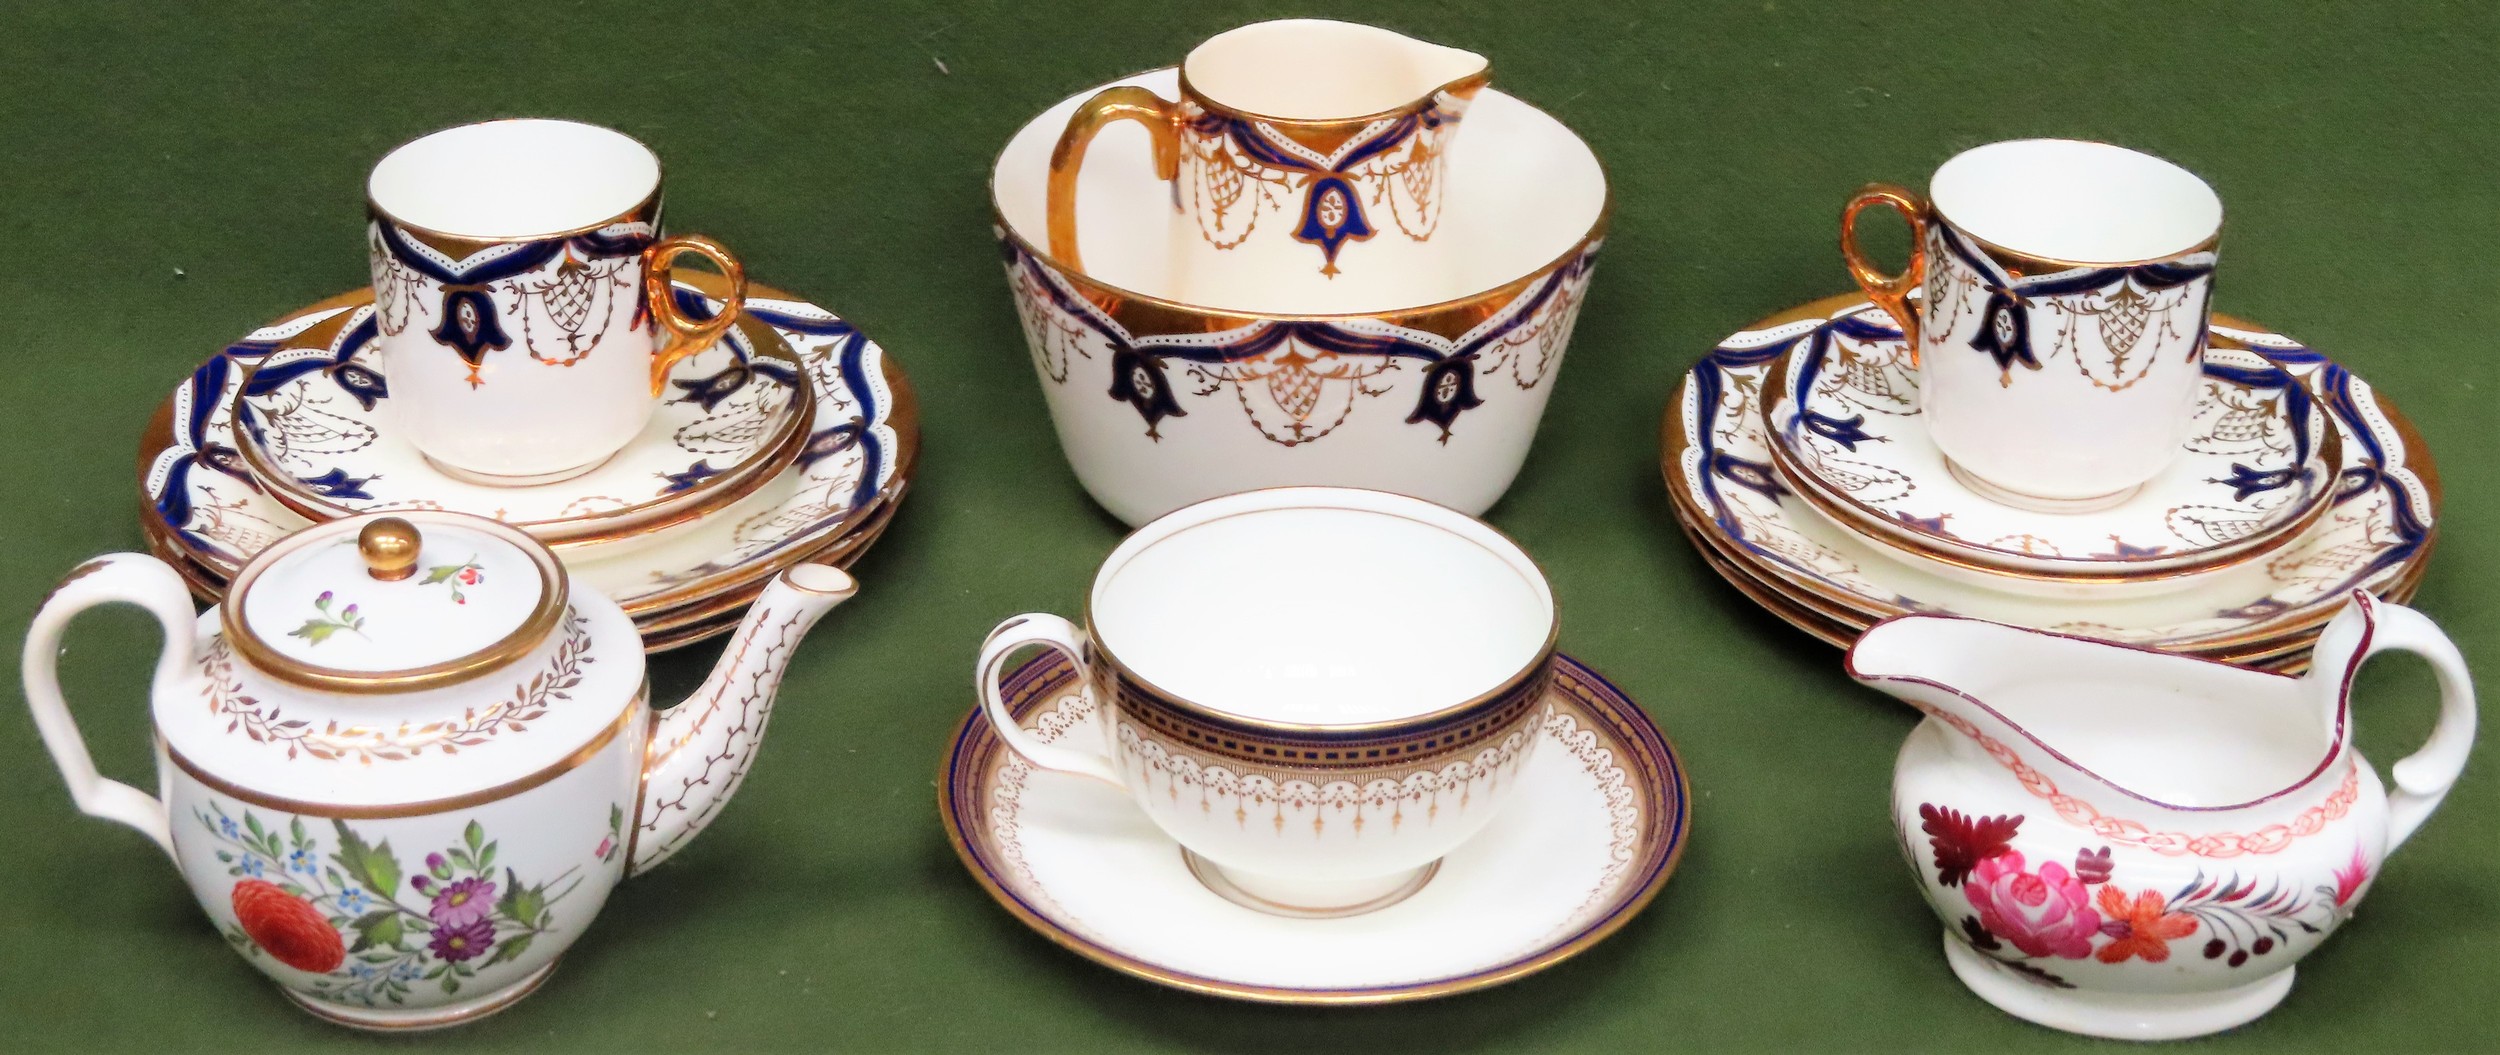 Parcel of antique English ceramics including cups and saucers, teaware, teapot etc